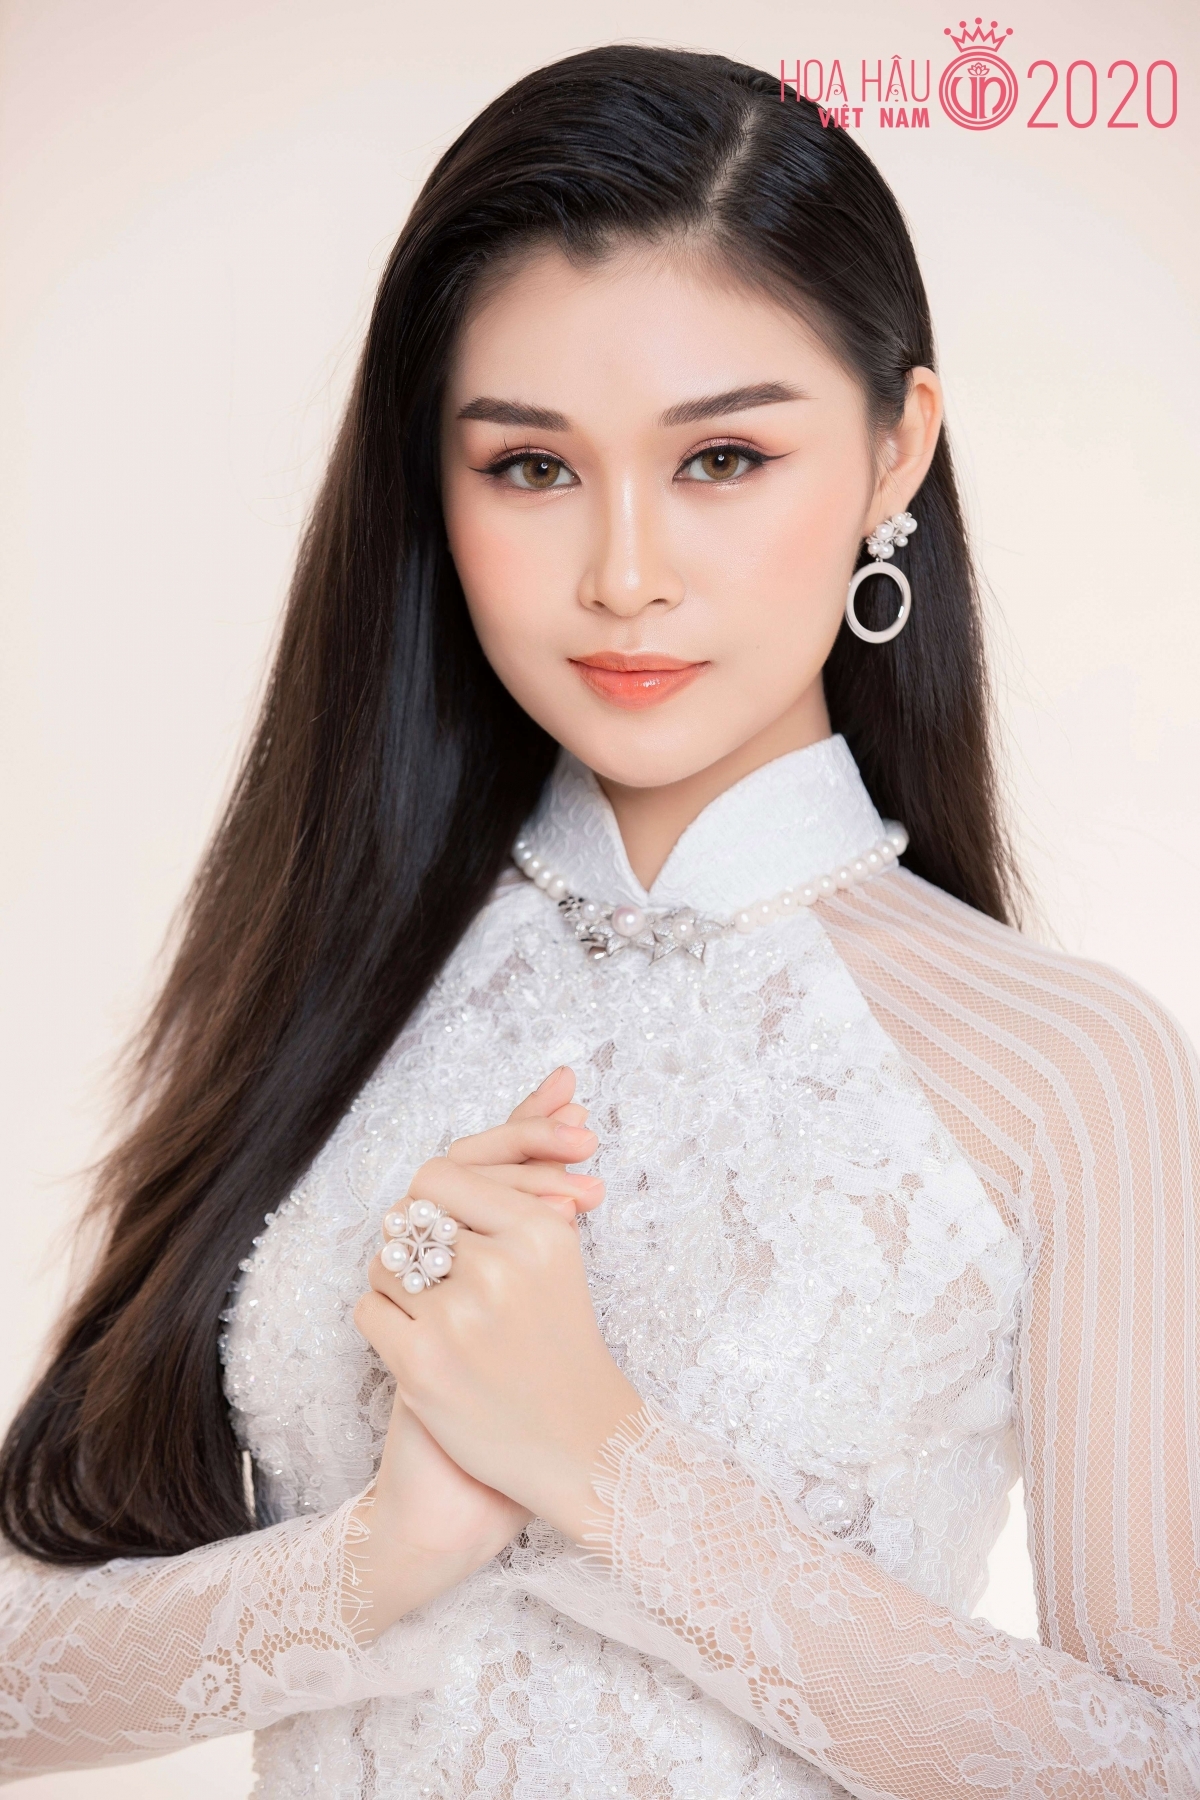 Traditional Ao Dai accentuates top Miss Vietnam contestants